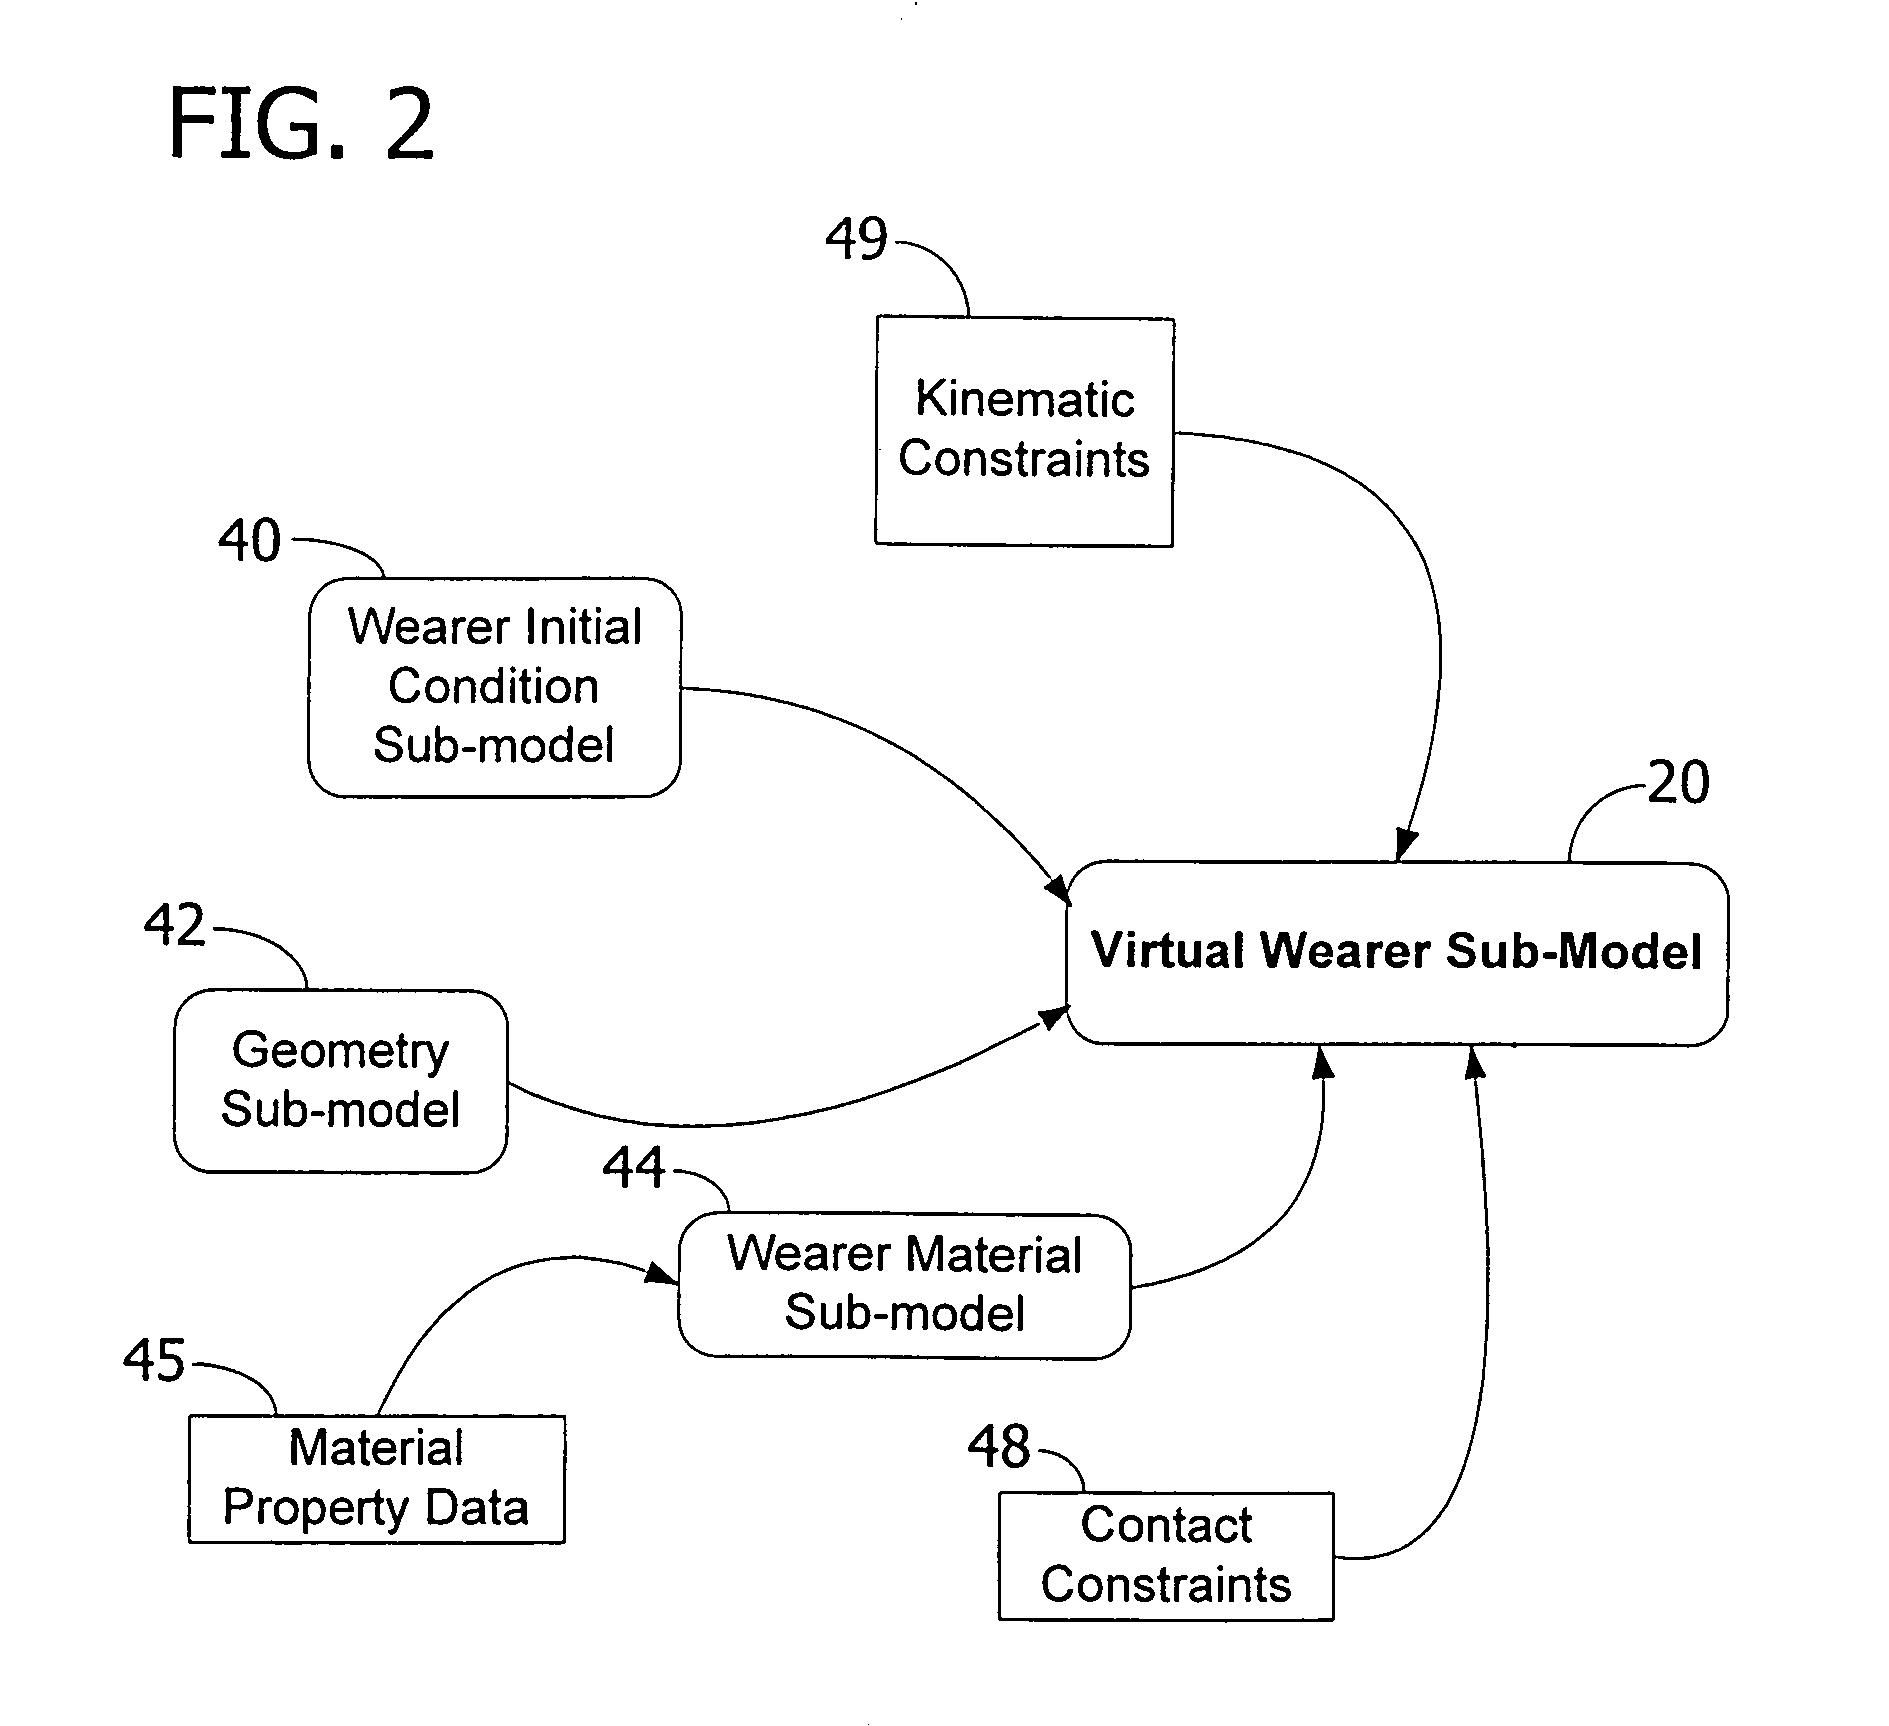 Method of evaluating the performance of a product using a virtual environment